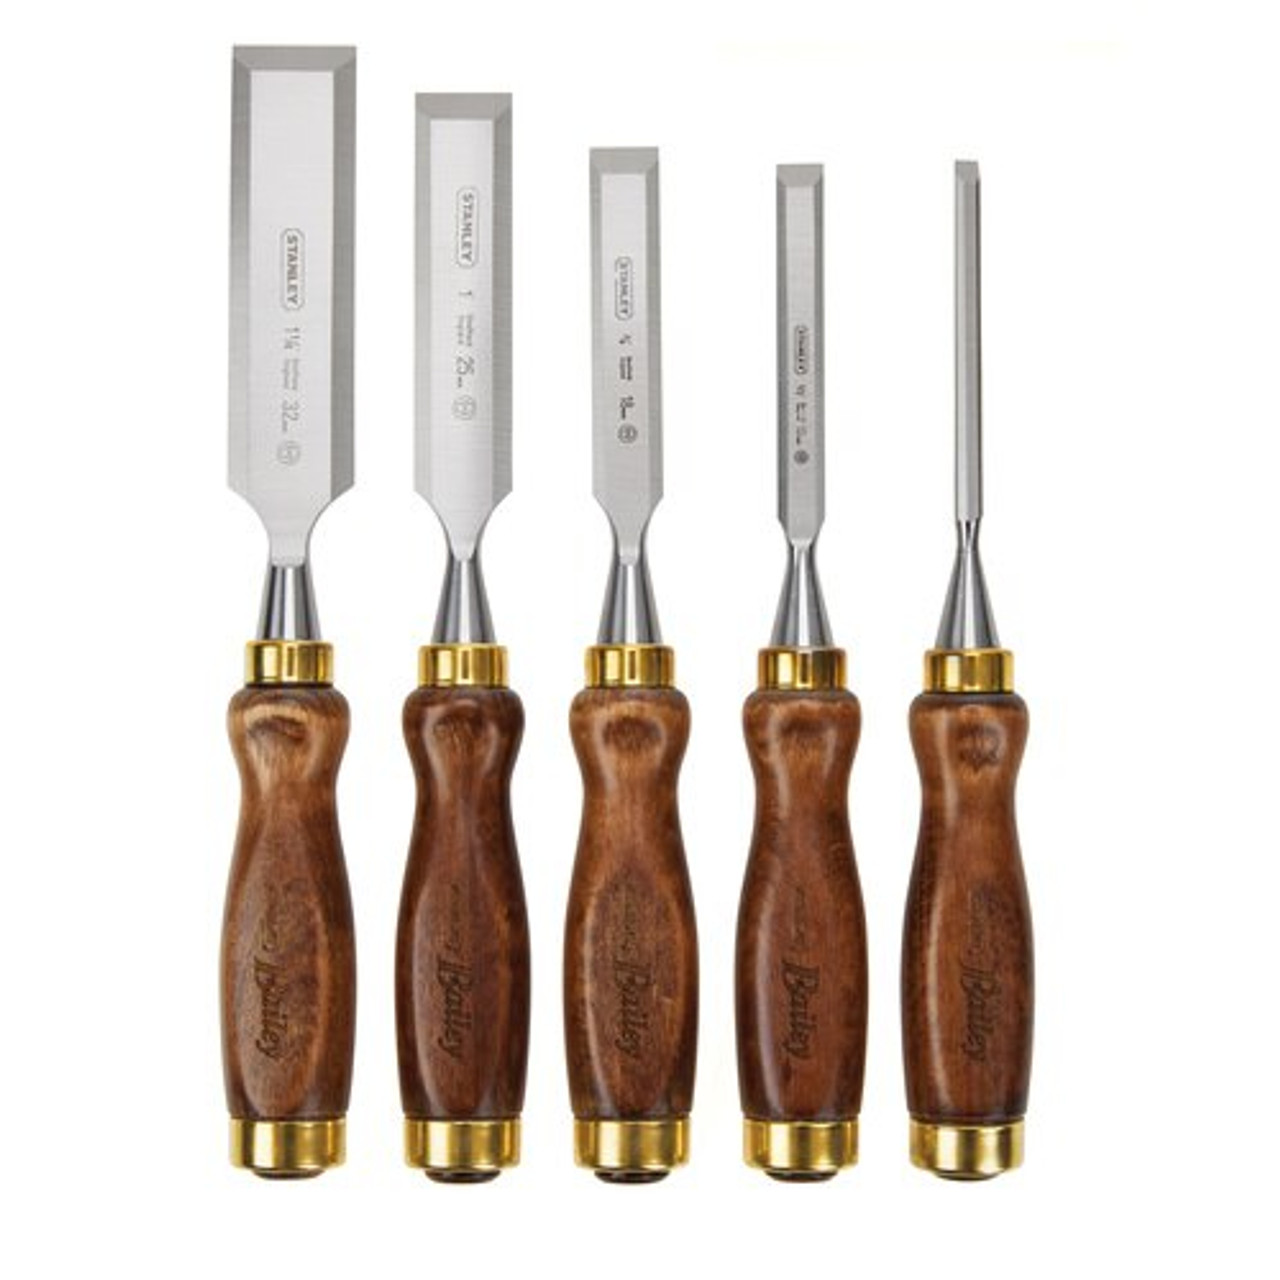 Stanley Tools 5 pc BaileyÂ® Chisel Set with Leather Pouch 16-401